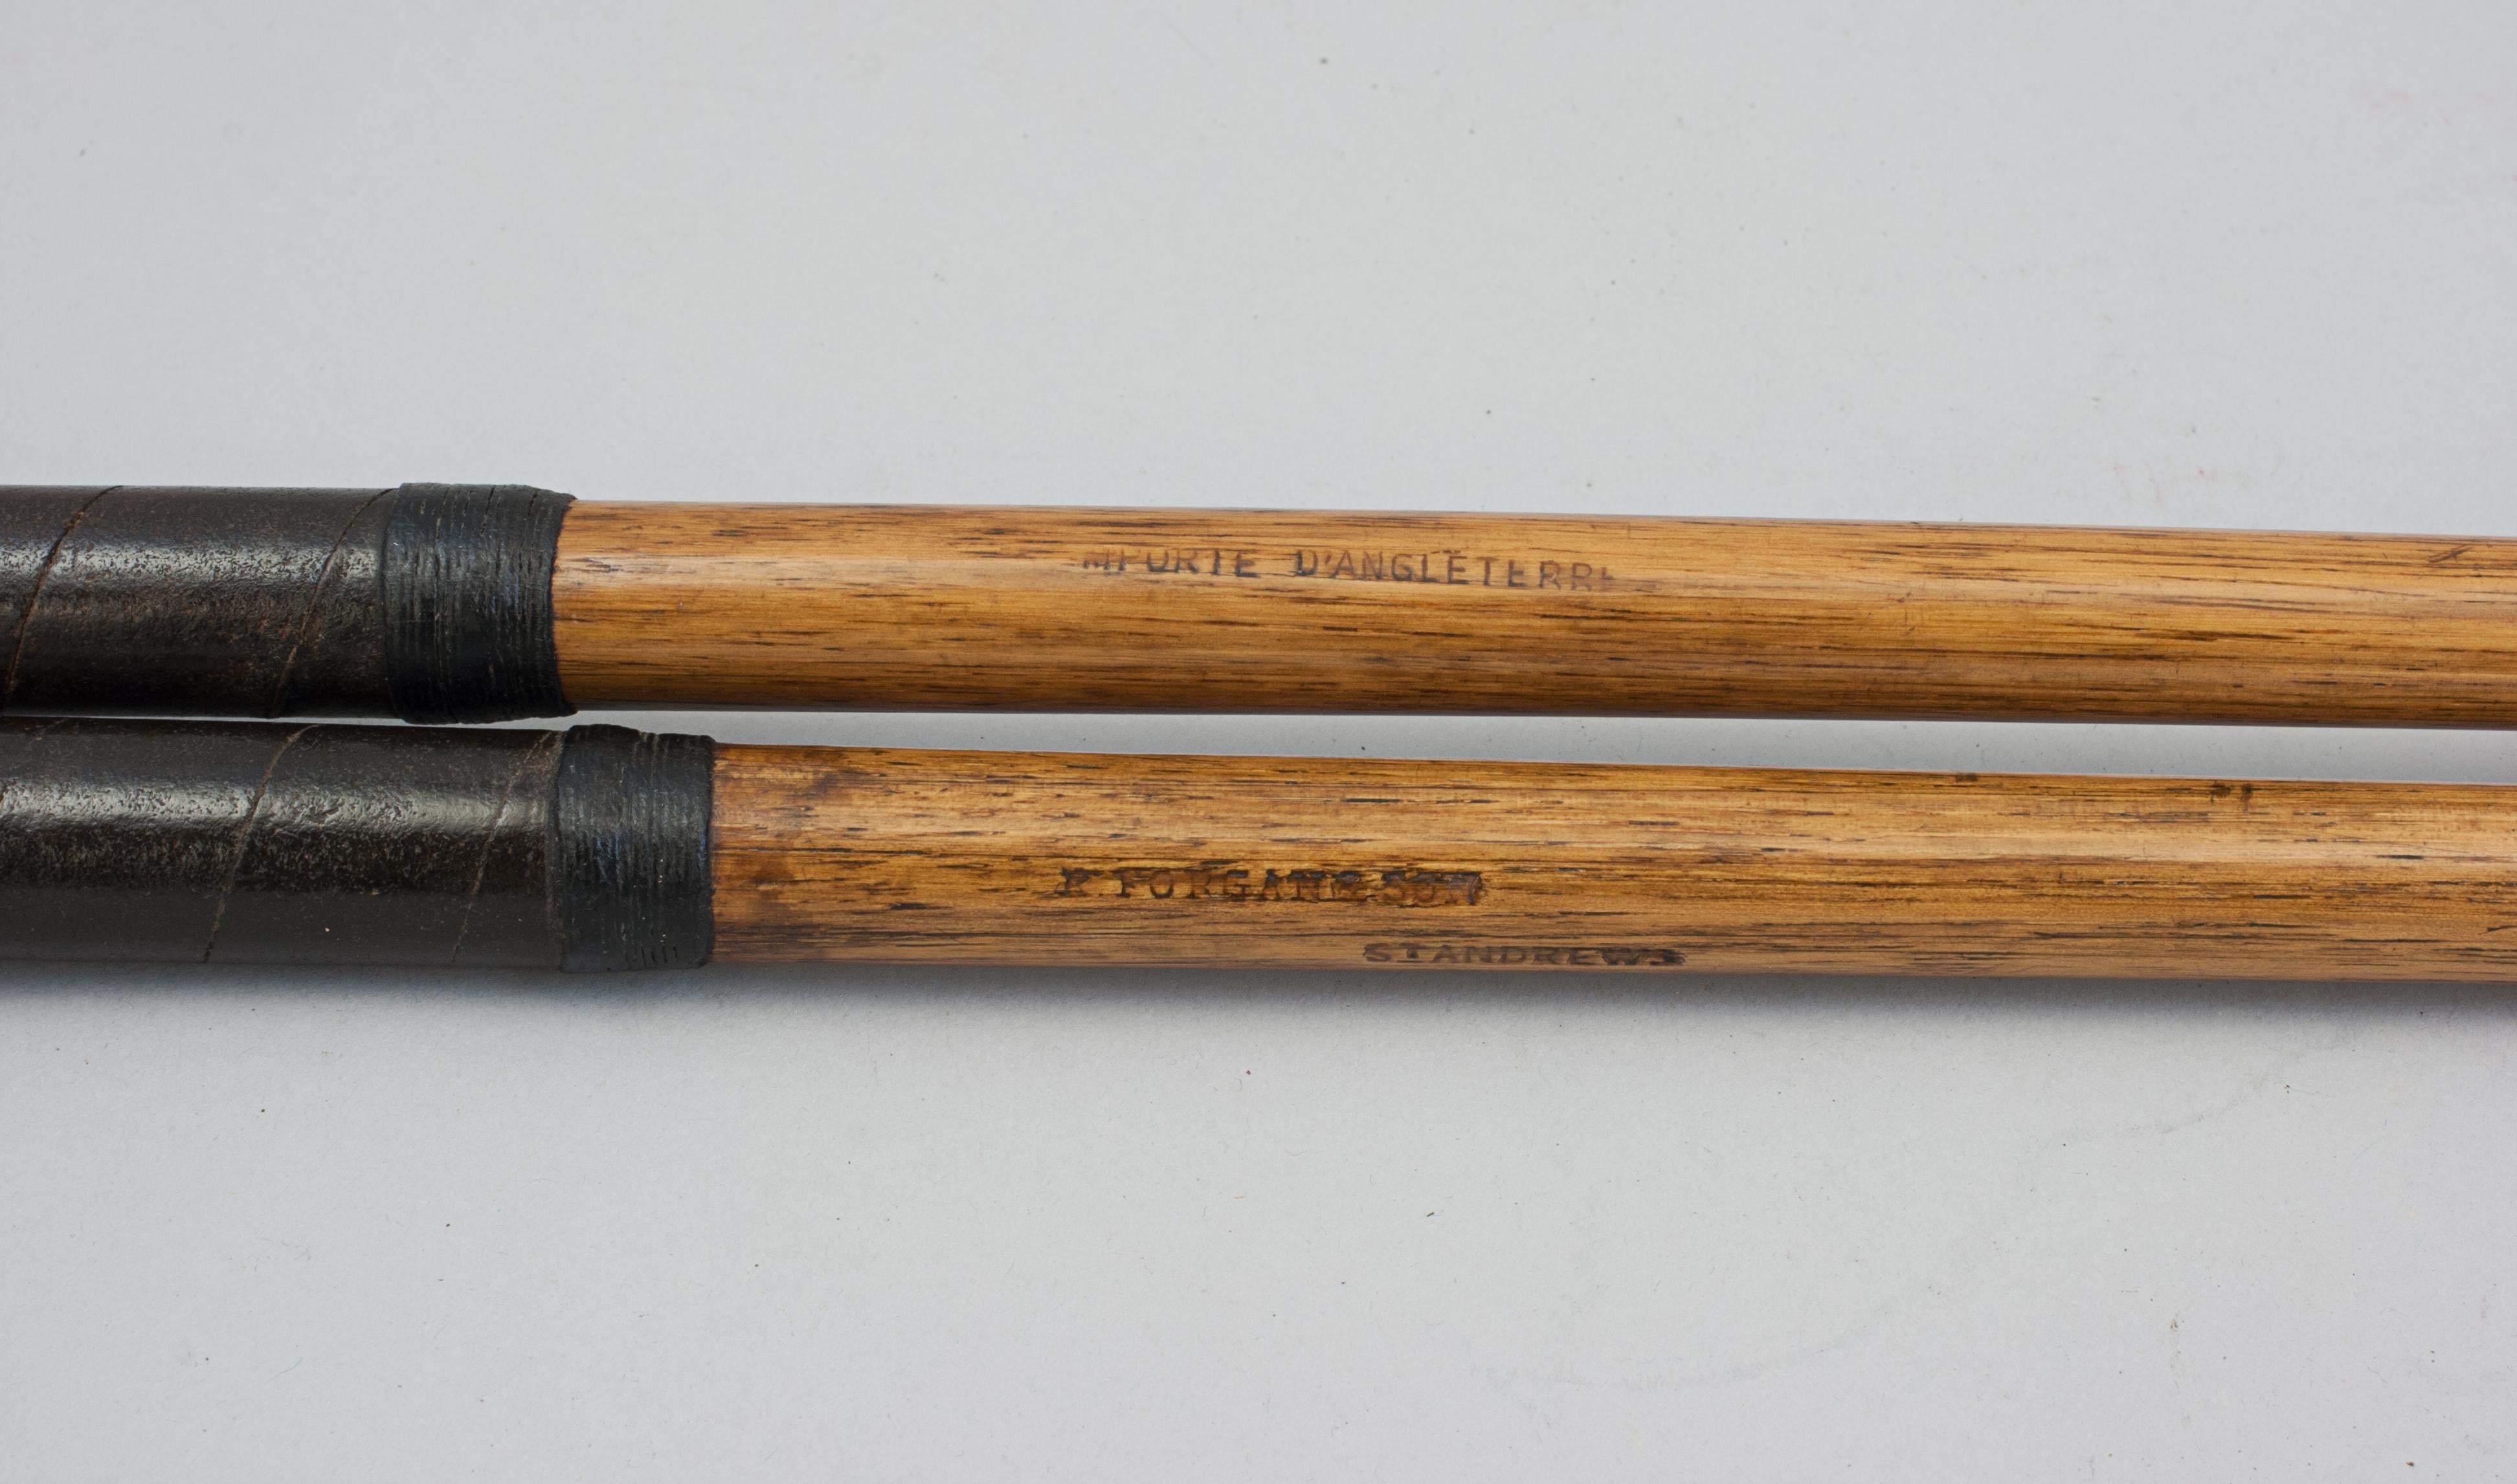 Scottish Pair of Golf Clubs by R. Forgan. Scotia, Mashie and Niblick